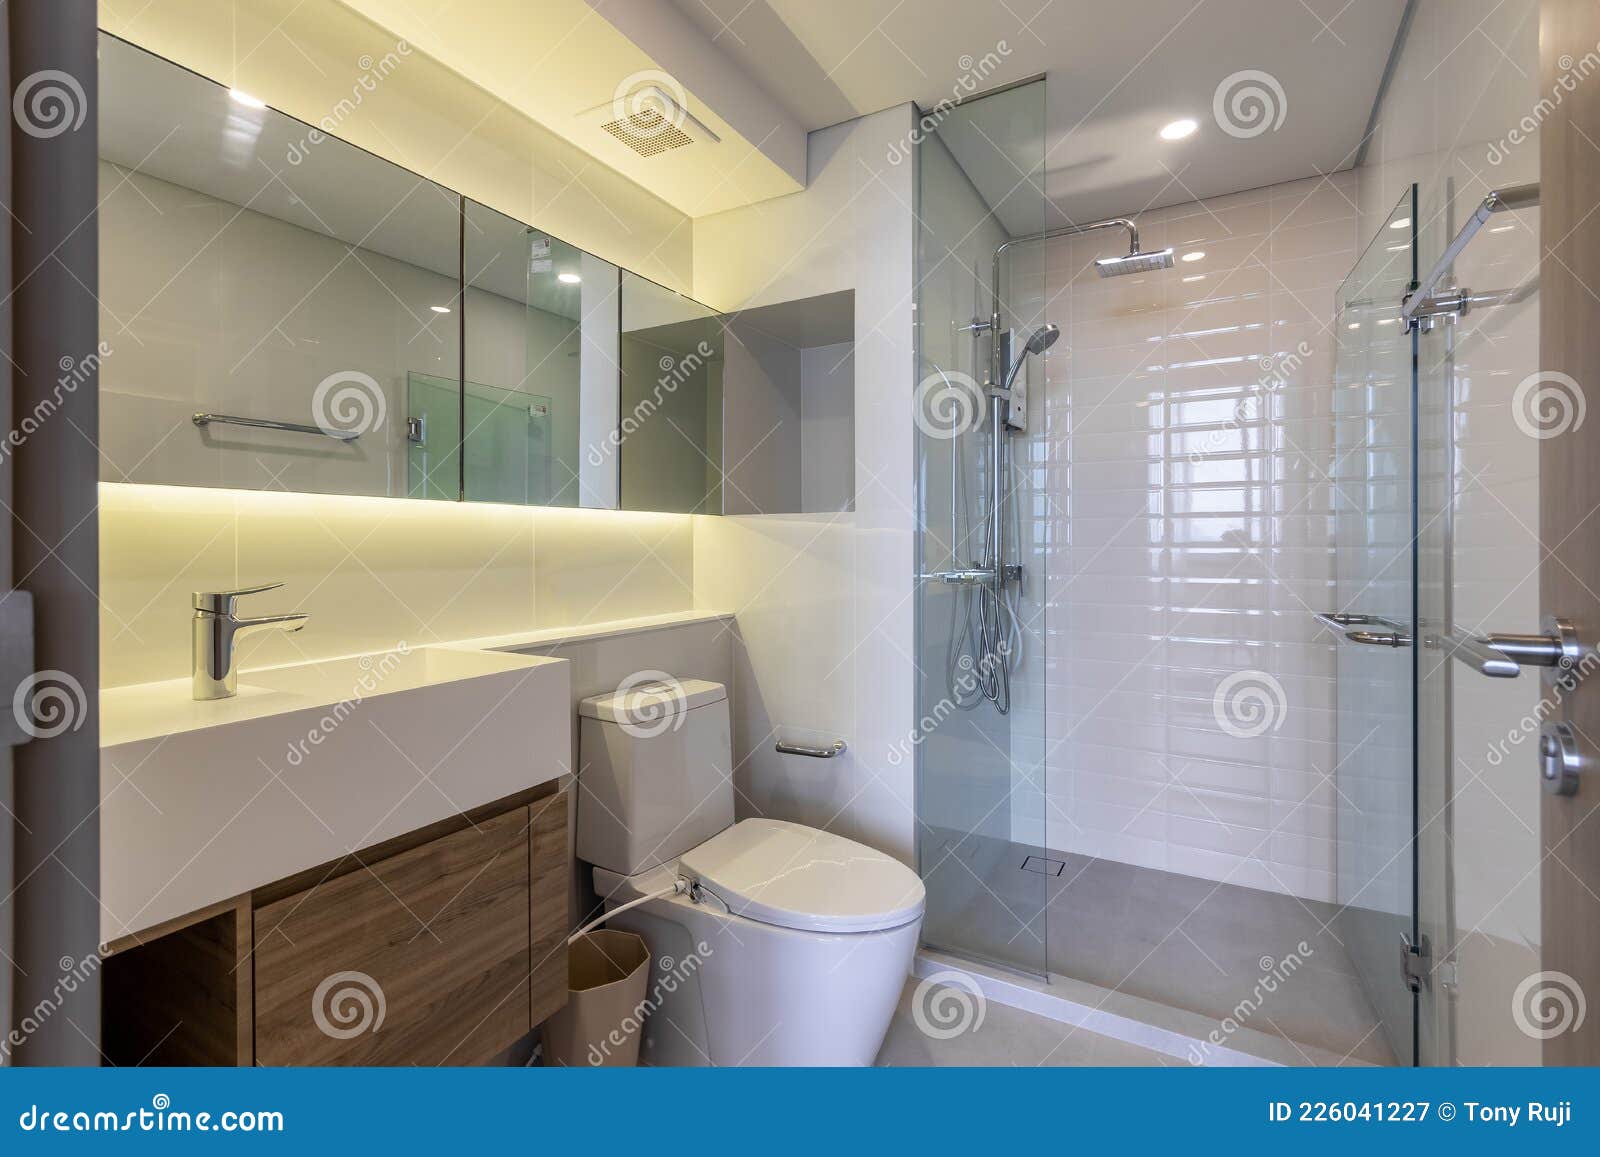 Clean and white Bathroom stock image. Image of home - 226041227